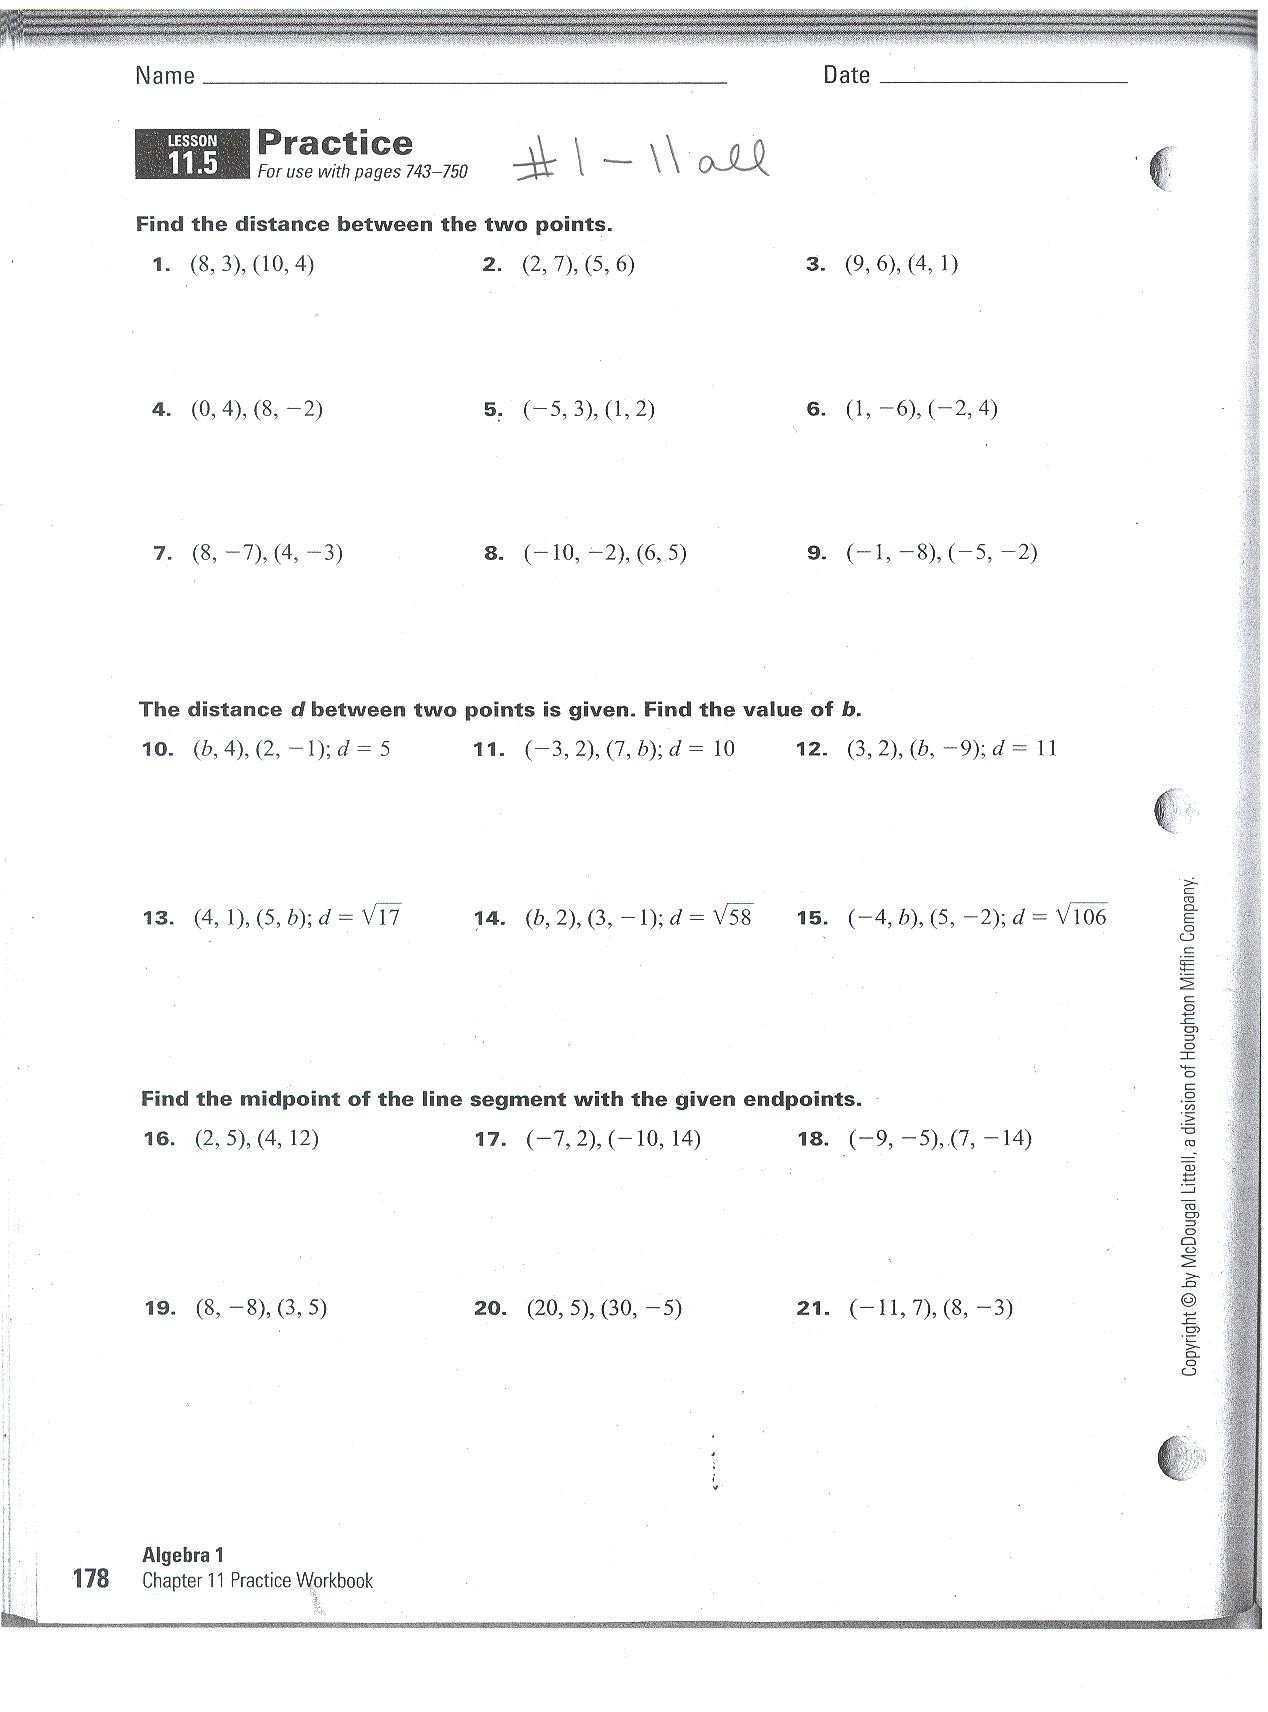 Awesome Collection Of The Midpoint Formula Worksheet Lovely Pertaining To The Midpoint Formula Worksheet